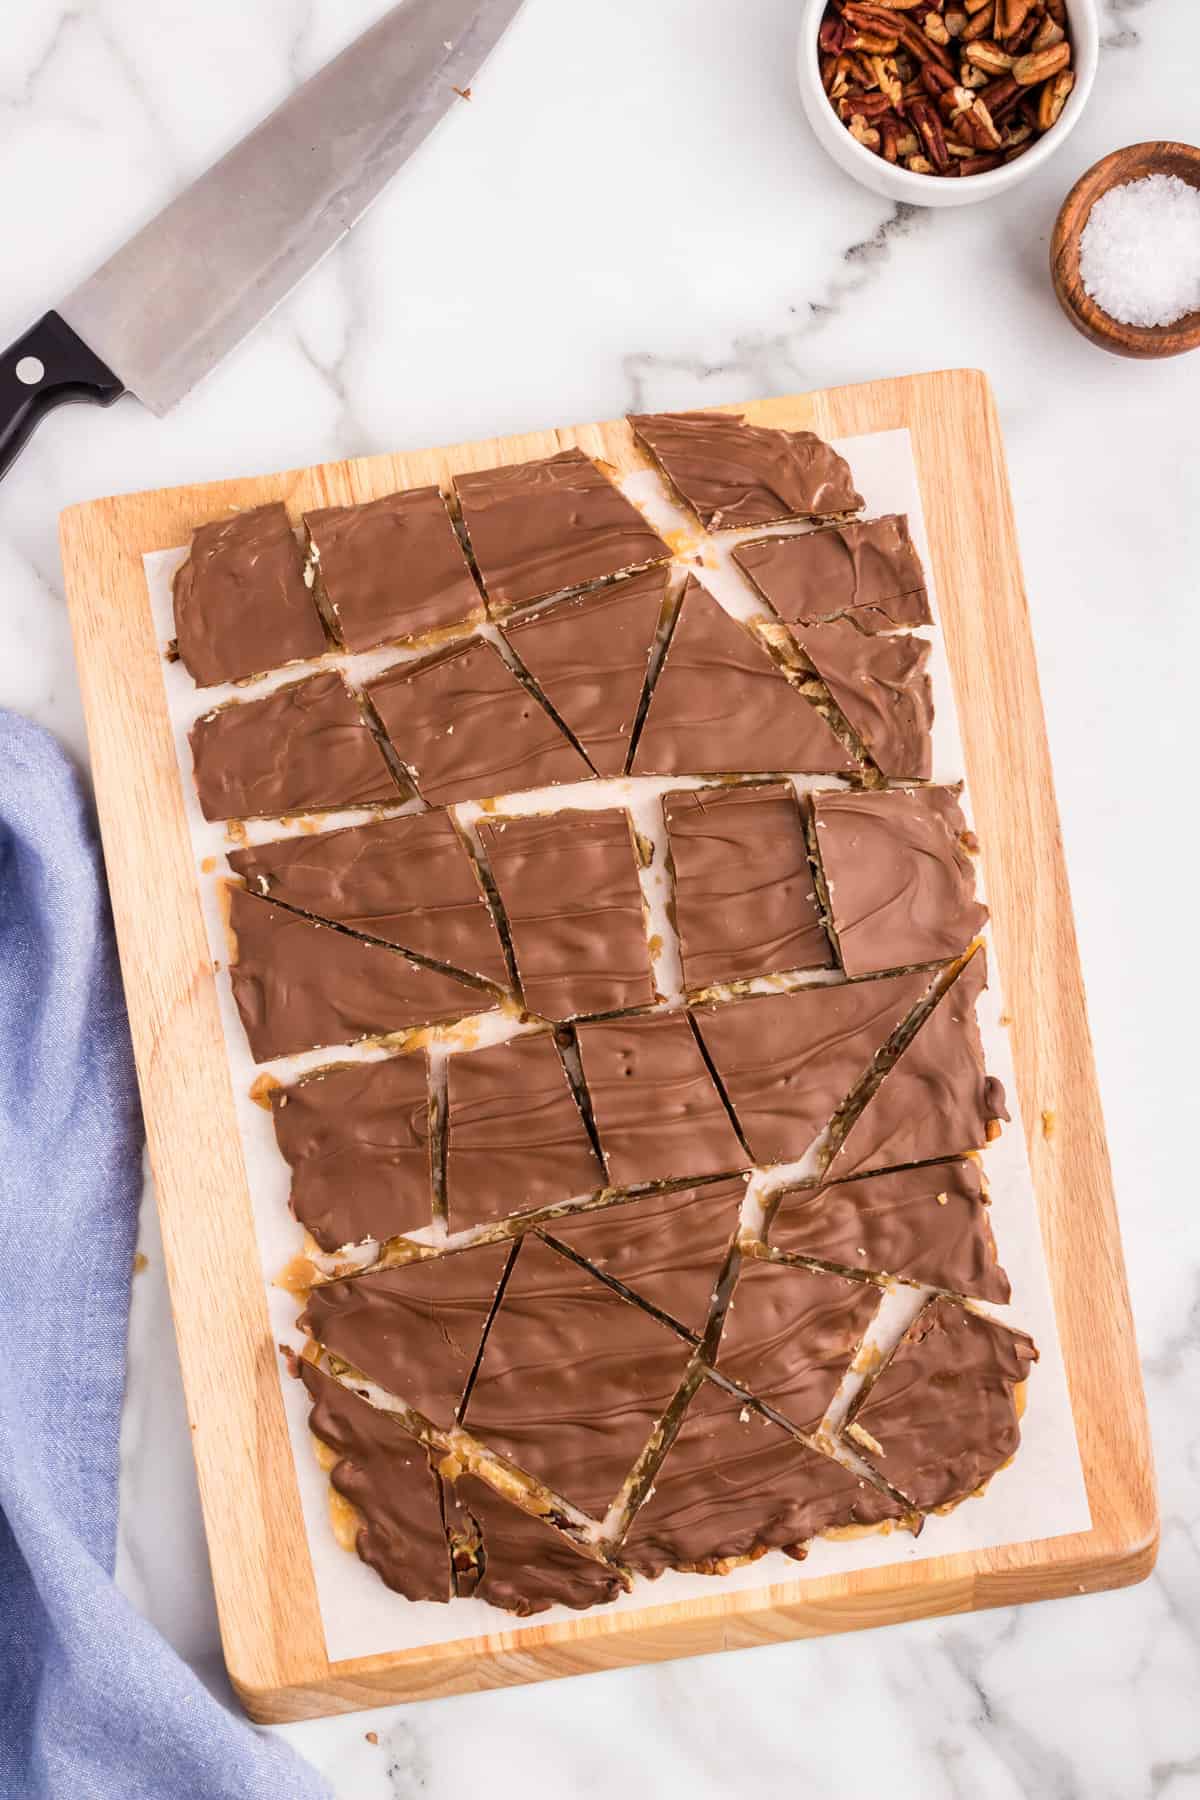 Broken apart Toffee pieces by using a knife on cutting board